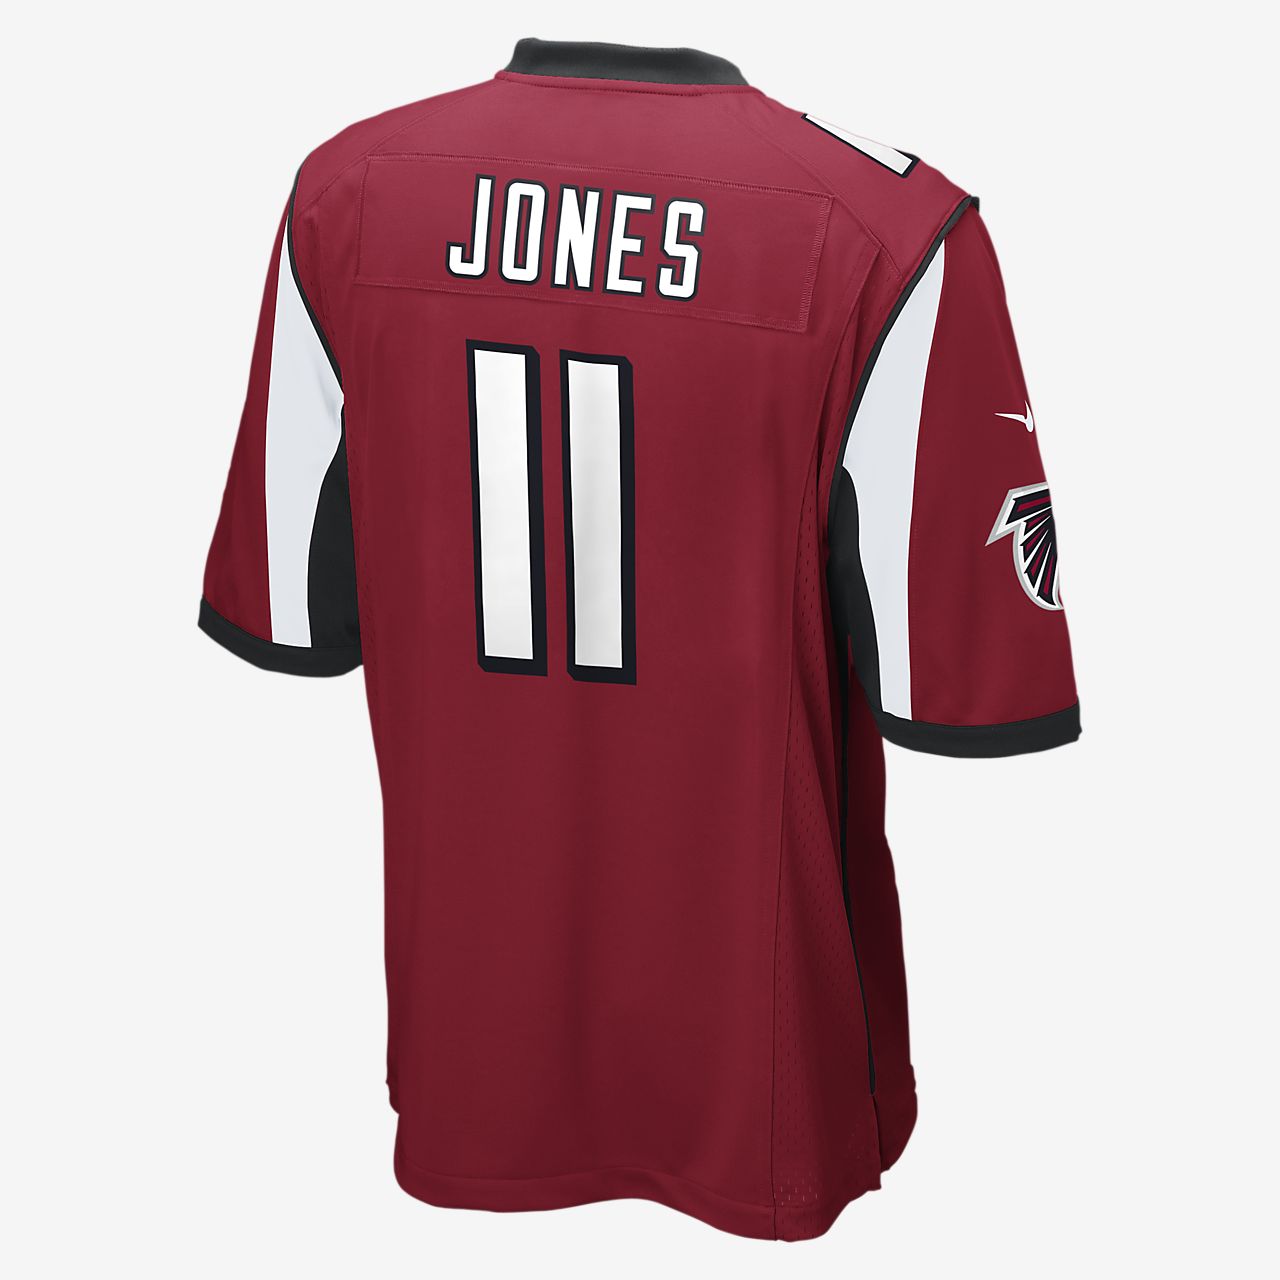 nfl falcons jersey